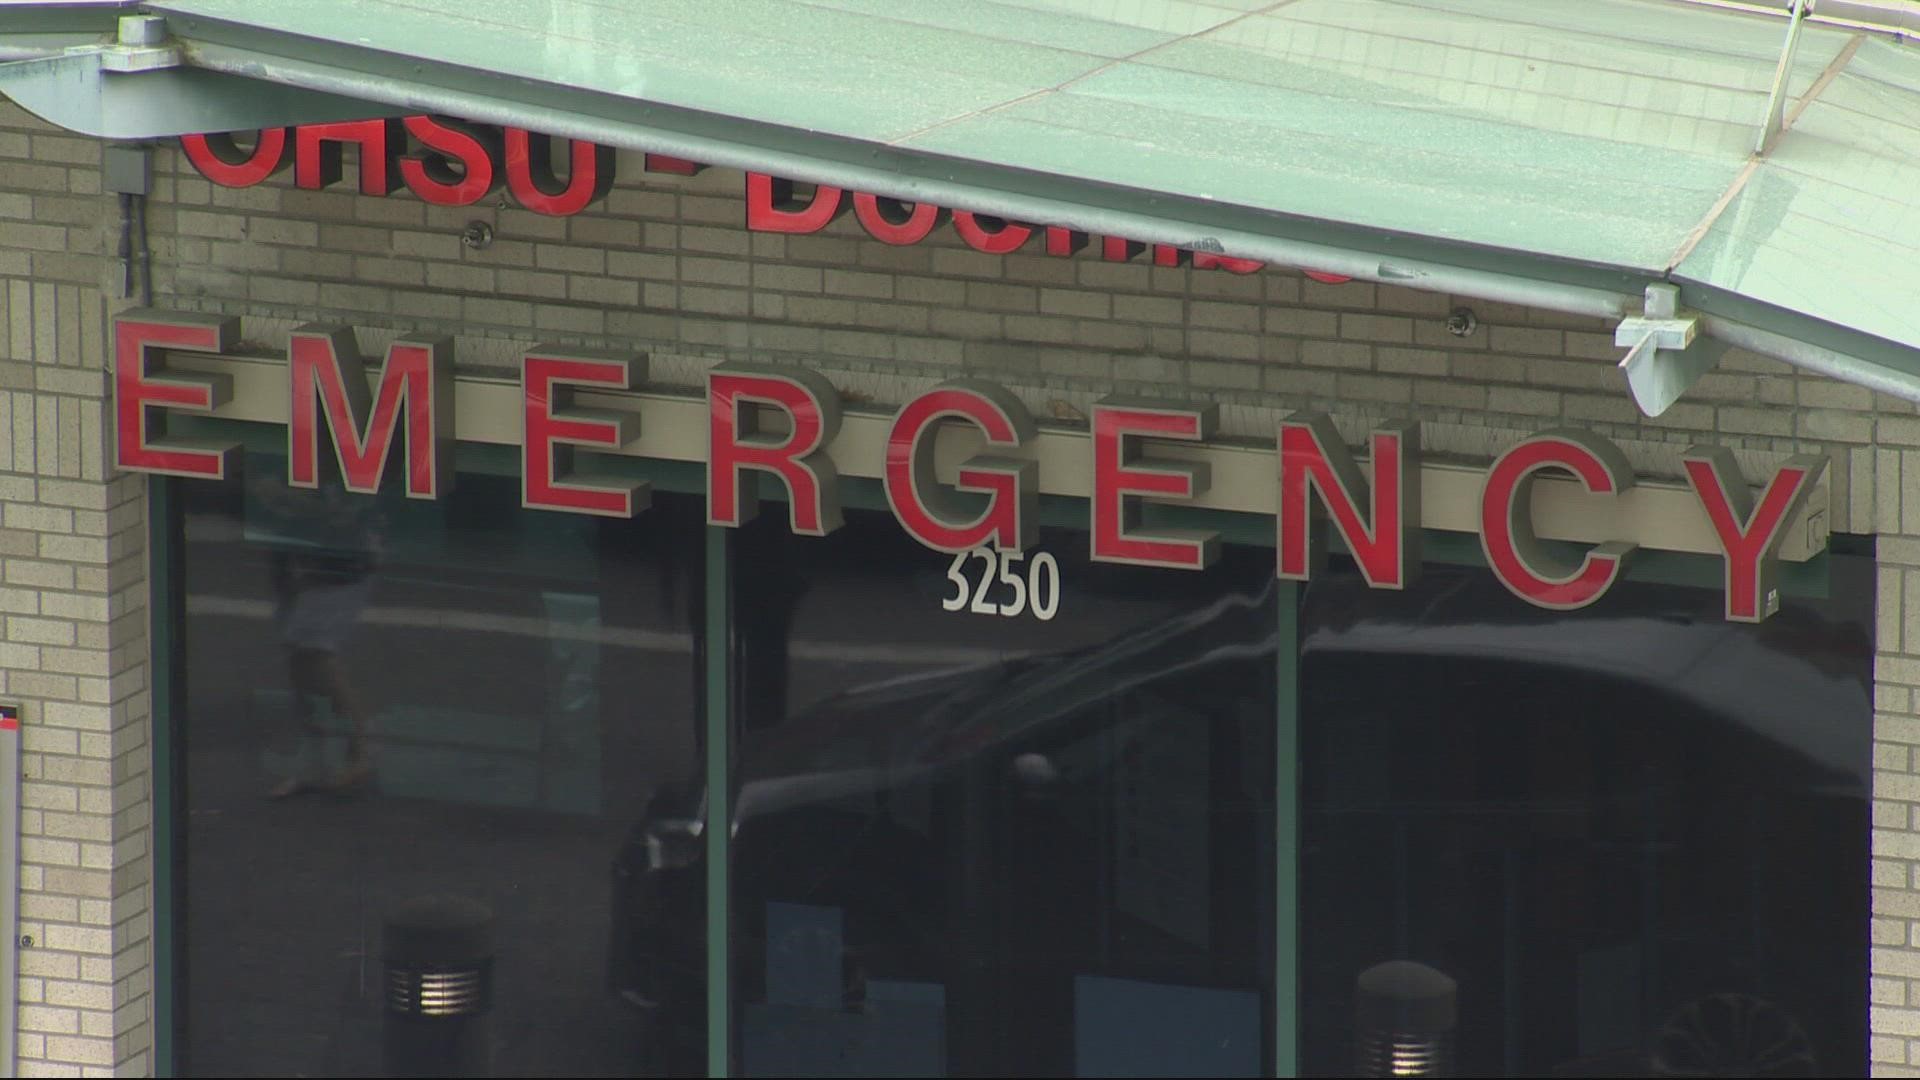 Oregon's COVID-19 hospitalizations are surging, with the number of patients jumping by nearly 90 in a day. The problem is now impacting emergency rooms.